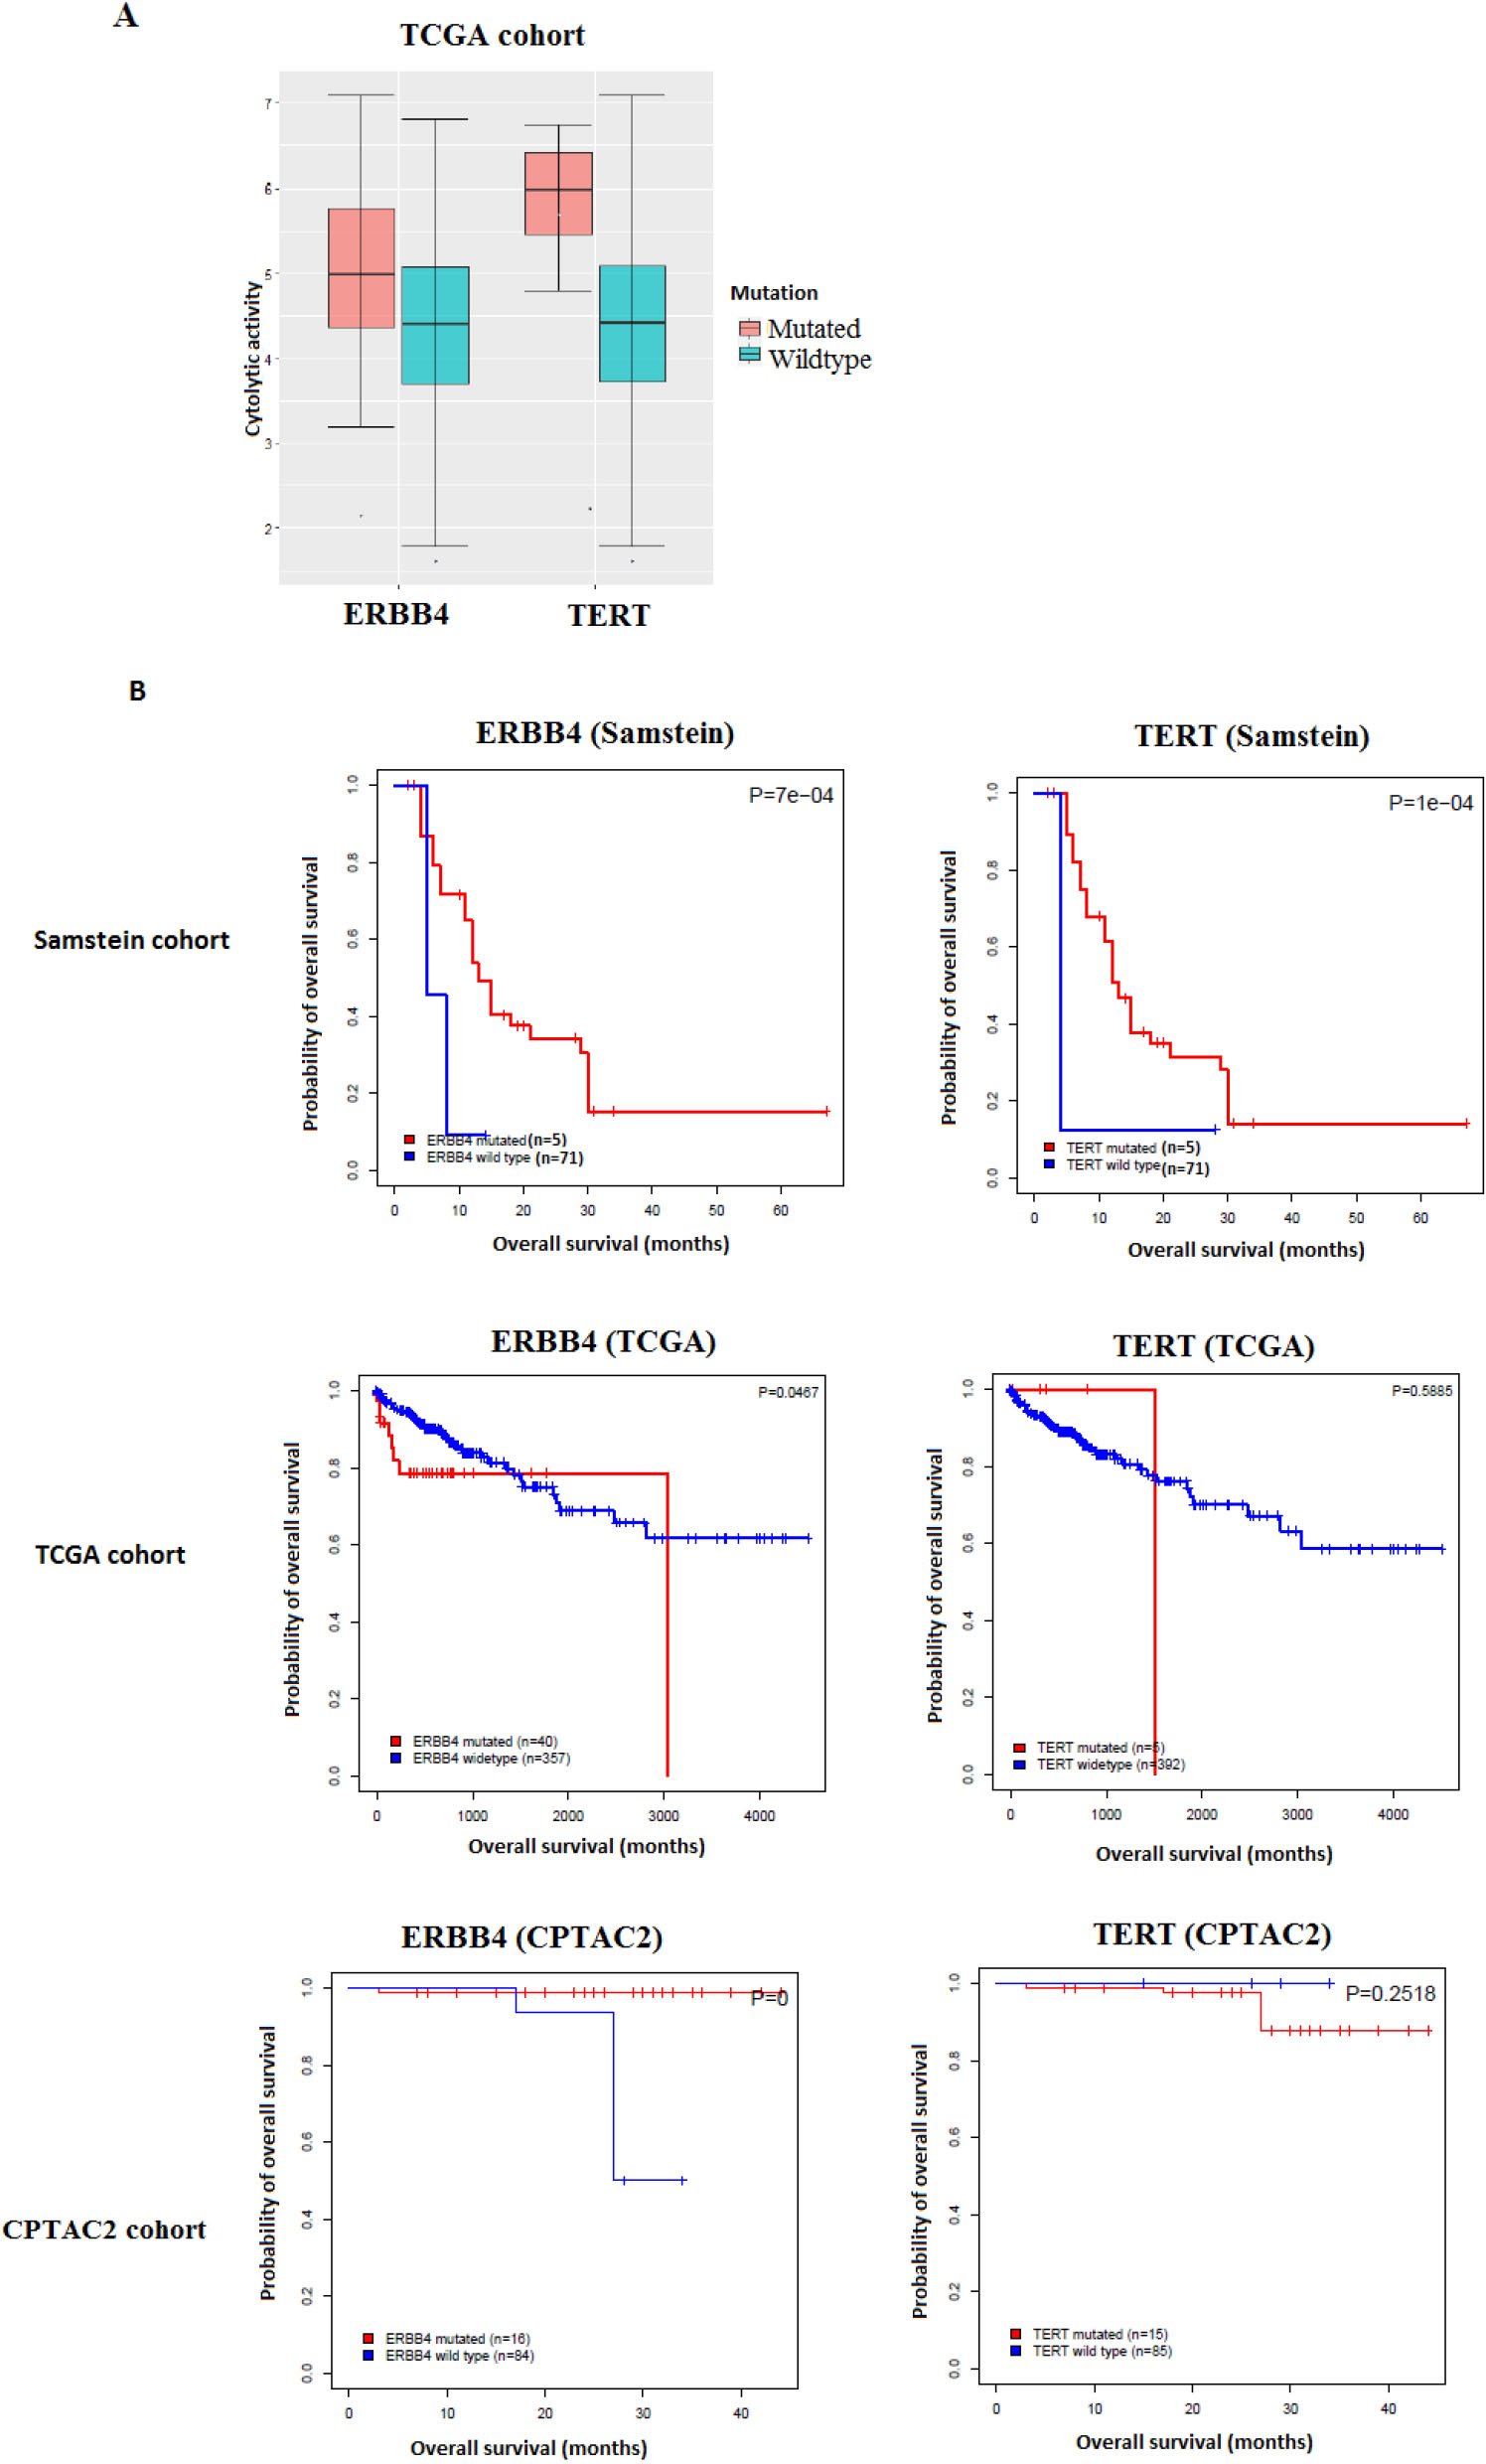 Gene mutations associated with antitumor immune response and better immunotherapy response in COAD. A. The mutations of two genes are consistently associated with the elevated cytolytic activity in TCGA-COAD cohort (Mann-Whitney U test, FDR < 0.05). B. Kaplan-Meier survival curves show that the mutations of the two genes are associated with better overall survival (OS) in the Samstein cohort with anti-PD-1/PD-L1 immunotherapy while they showed no significant correlation with OS in either of TCGA- and CAPTAC2 COAD cohorts not receiving immunotherapy (log-rank test, P< 0.05).